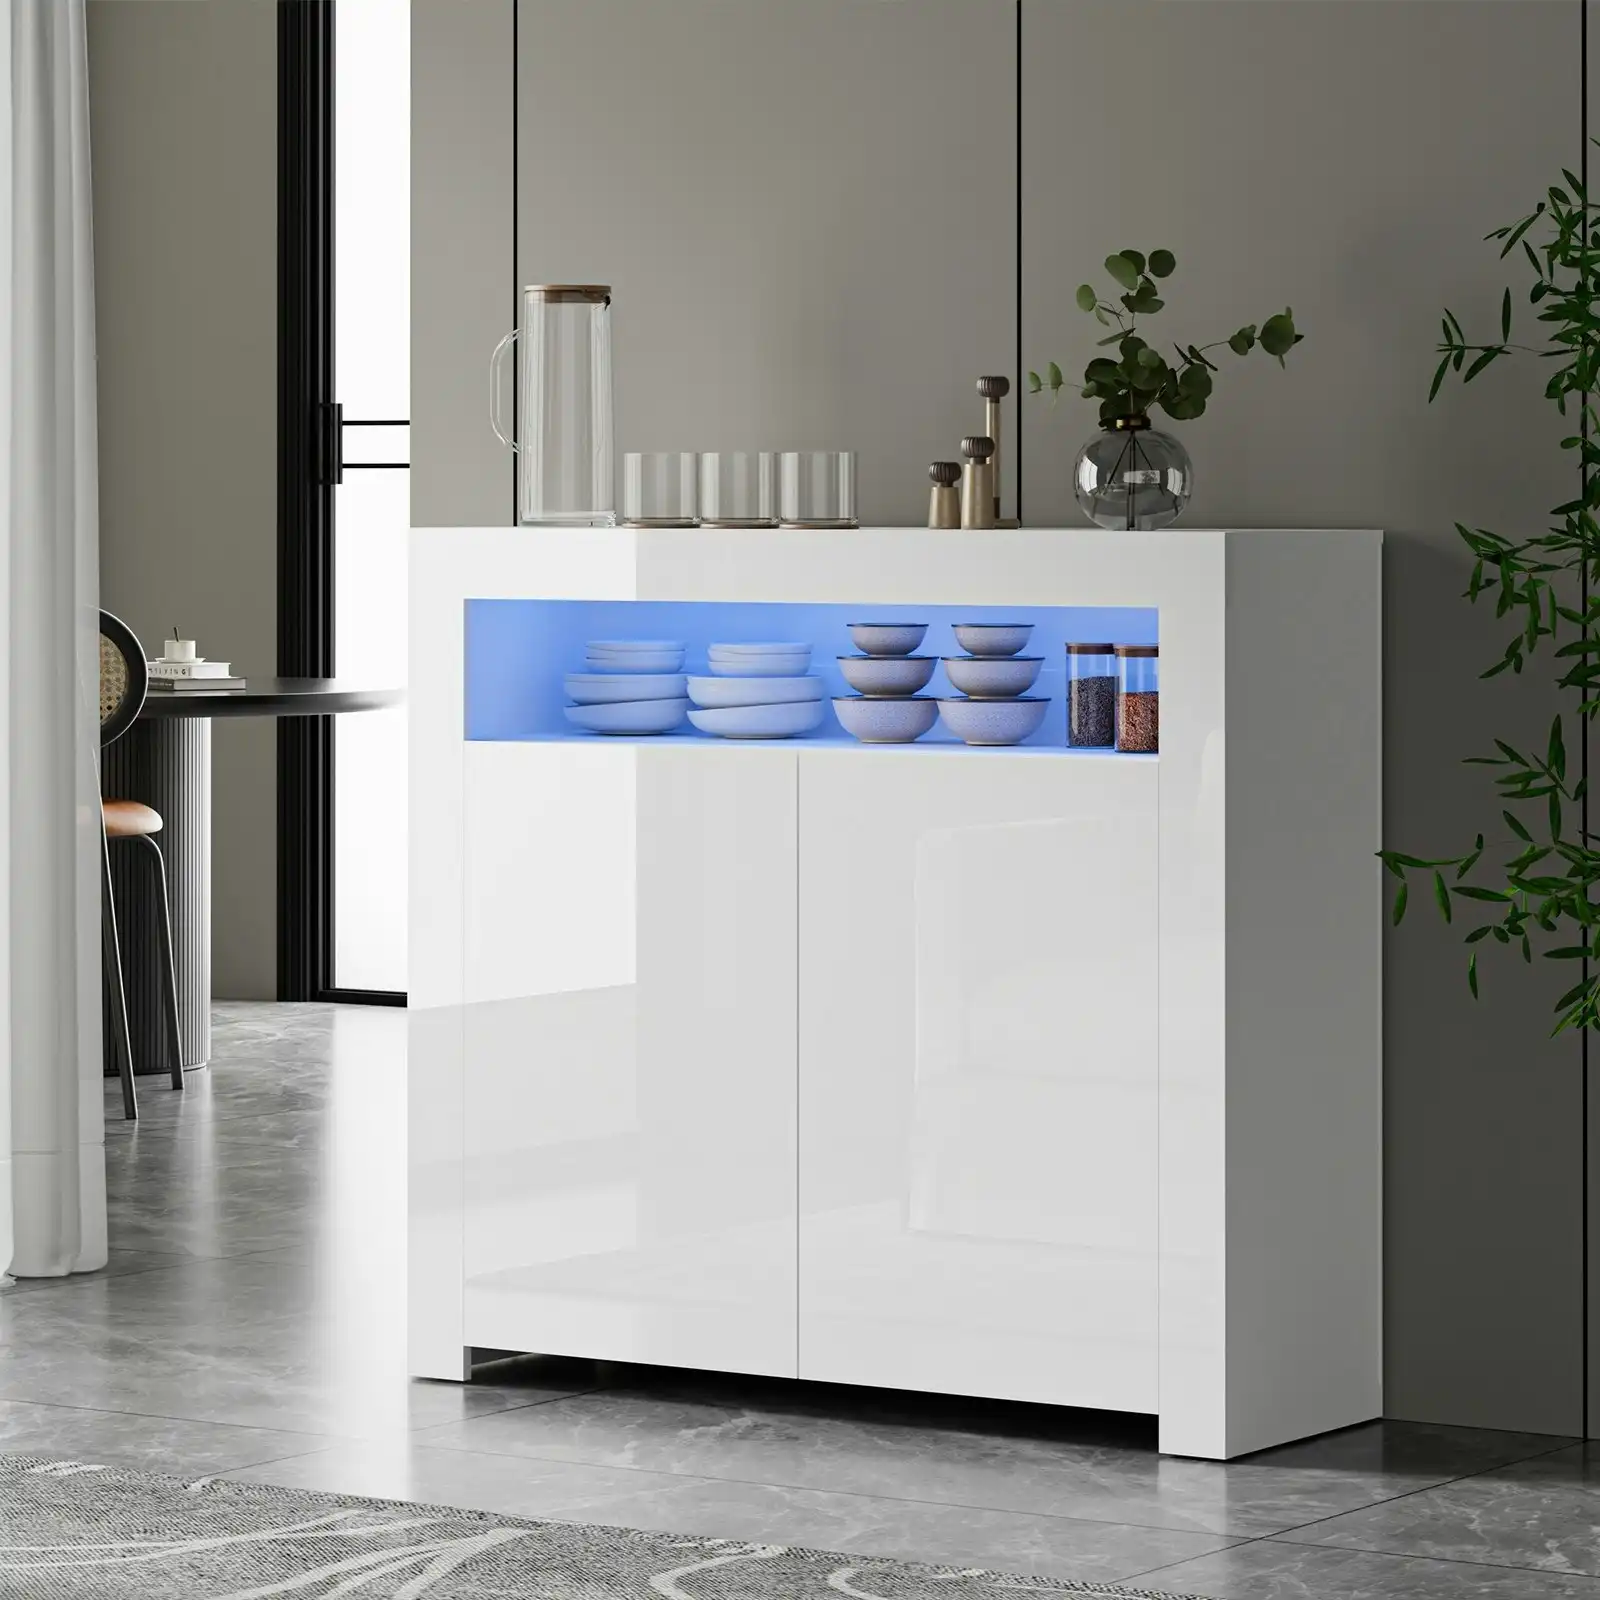 Oikiture Buffet Sideboard Storage Cabinet LED RGB High Gloss 2 Doors White